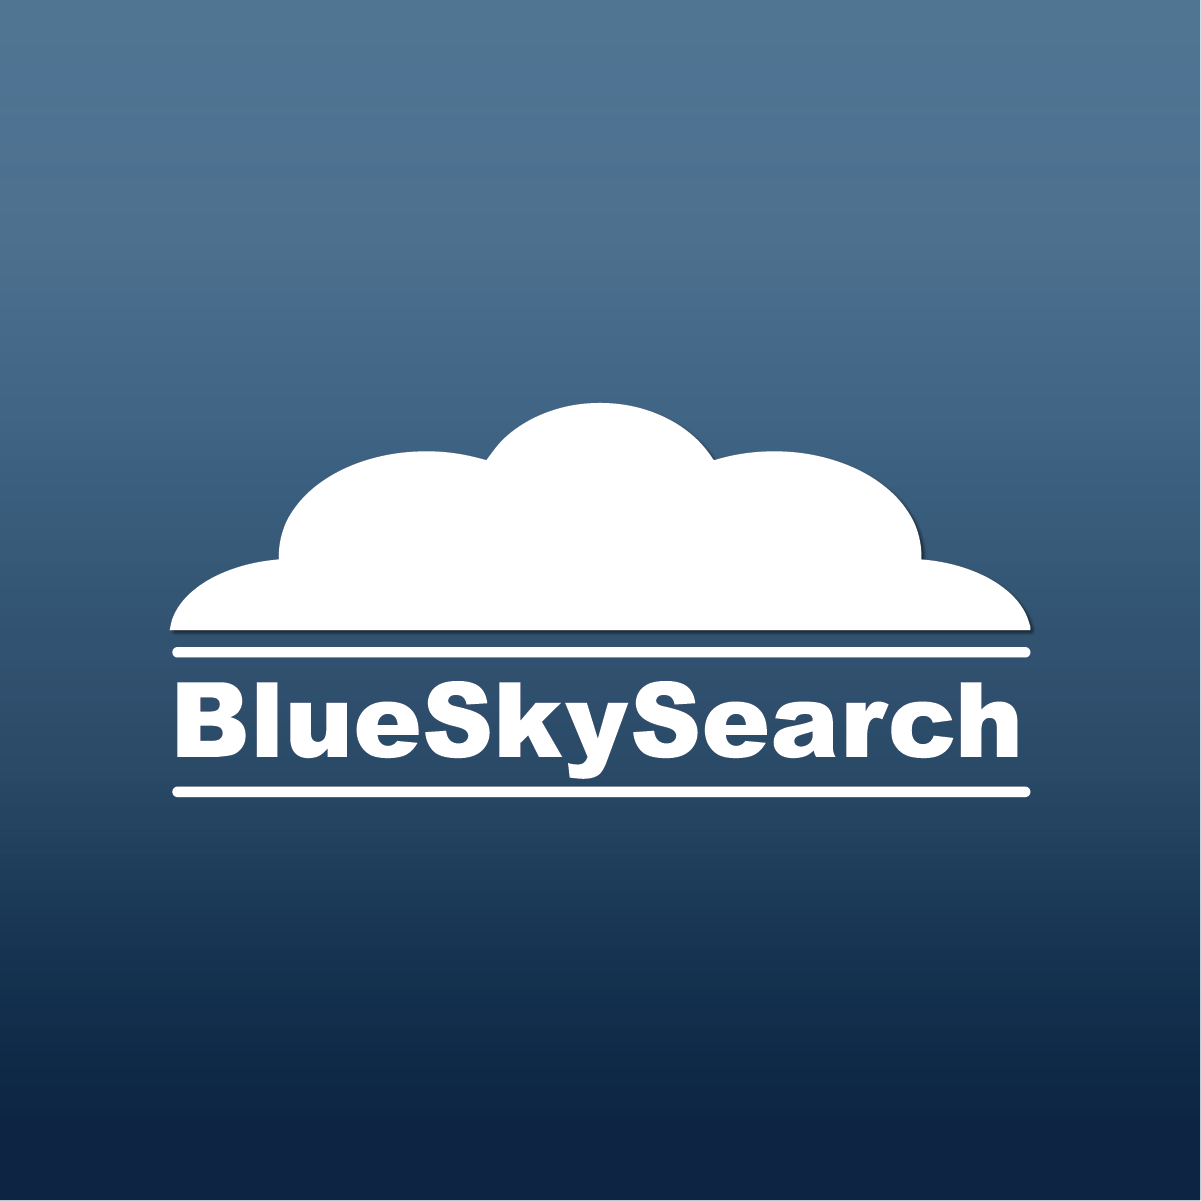 BlueSkySearch Updated Logo